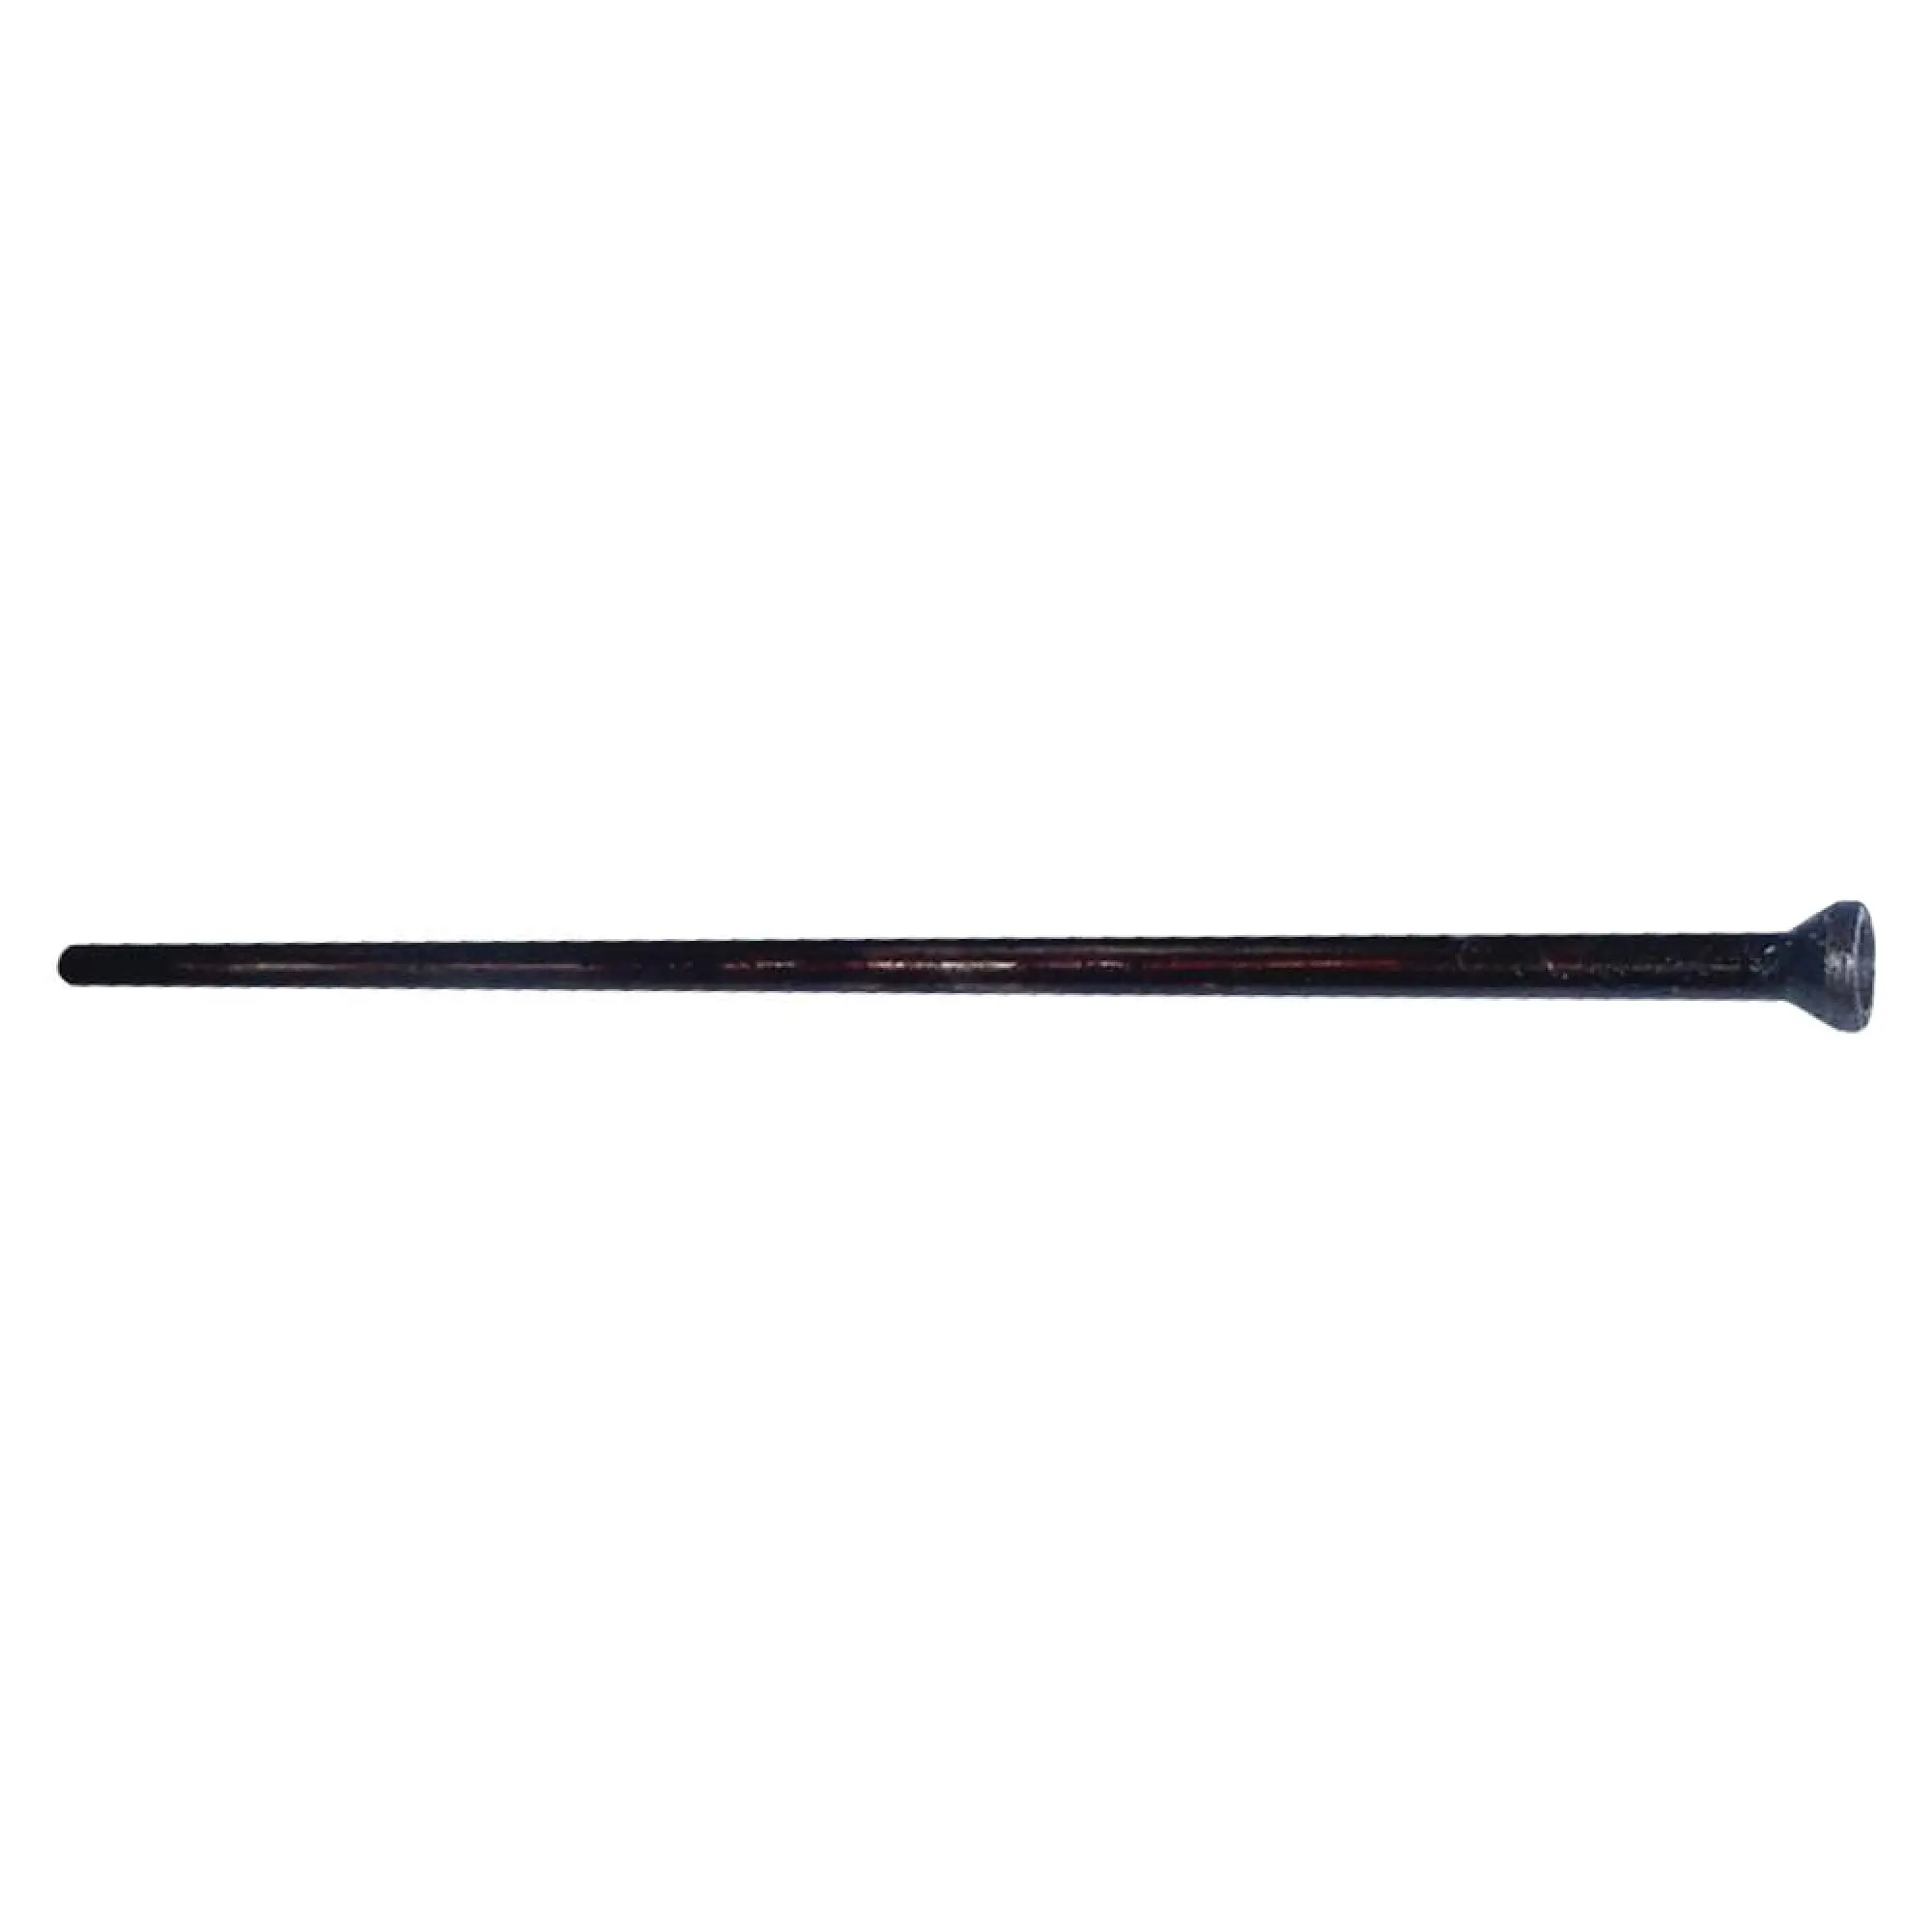 Factory Made 704783R2 PUSH ROD fits for Mahindra Case IH International Tractor Spare Parts in wholesale price